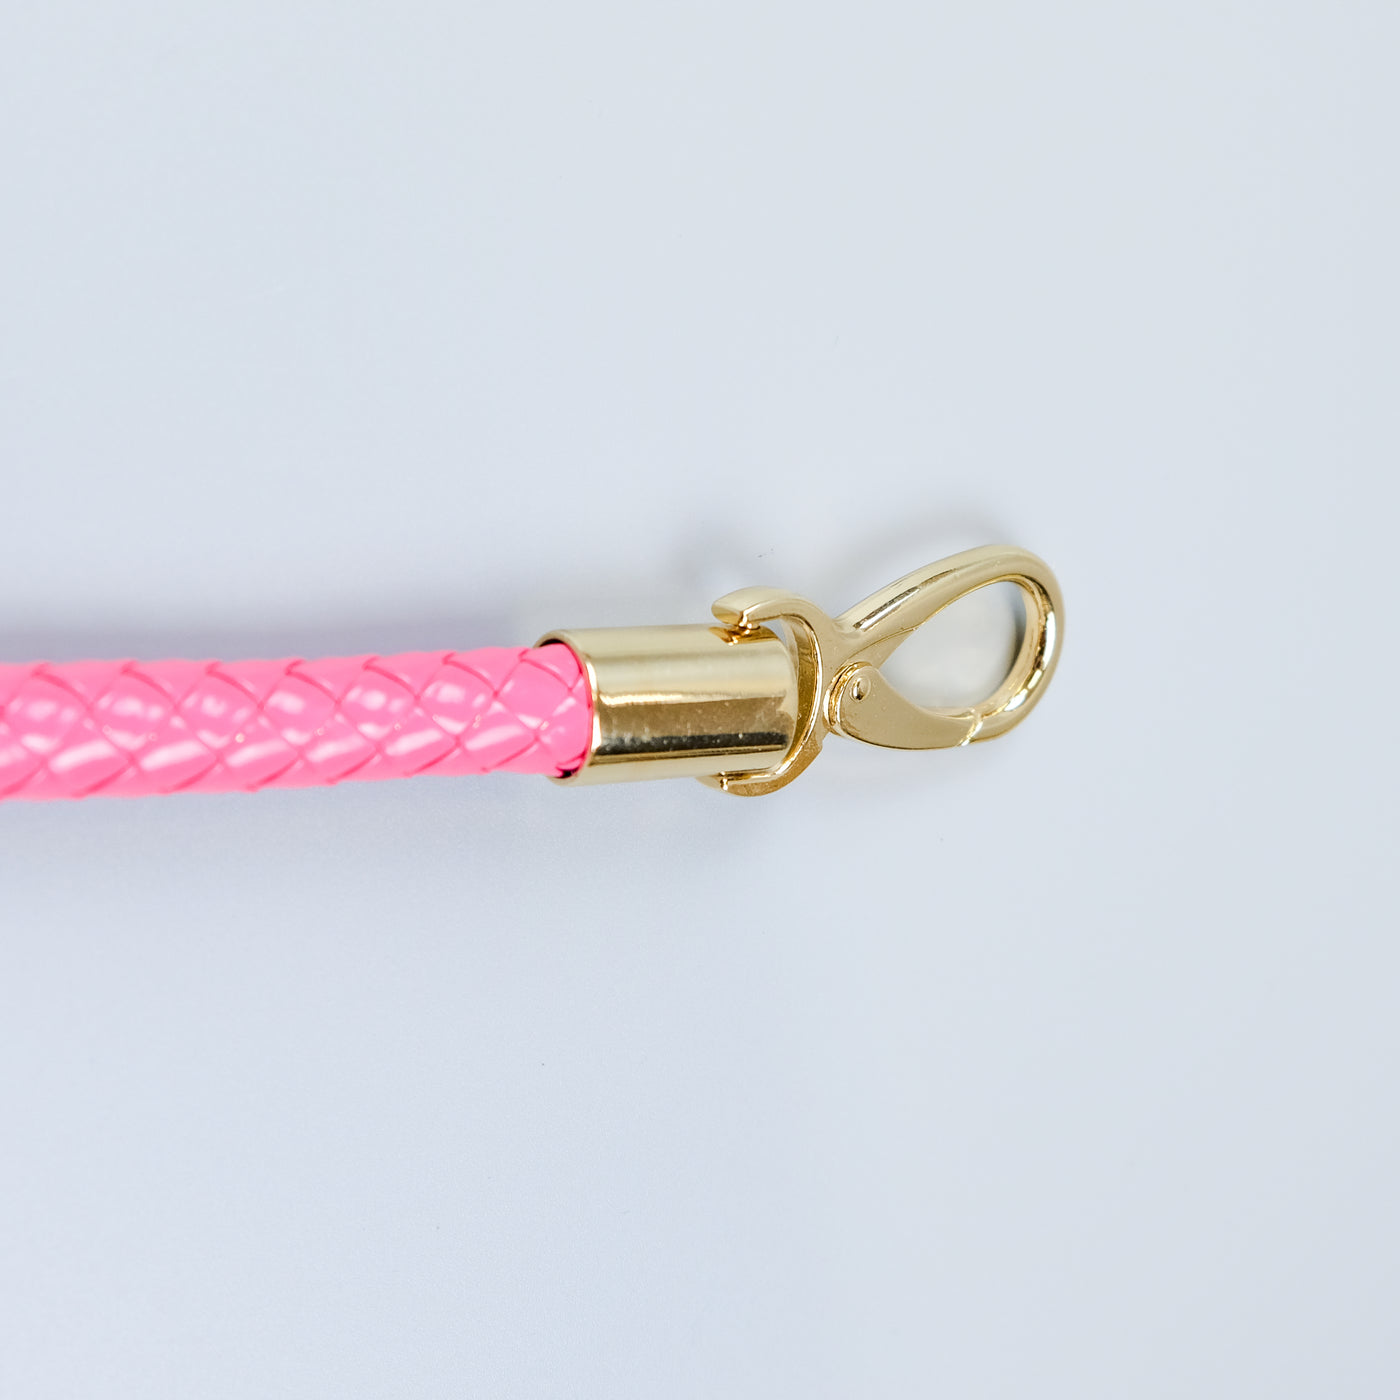 Braided handle with swivel clip